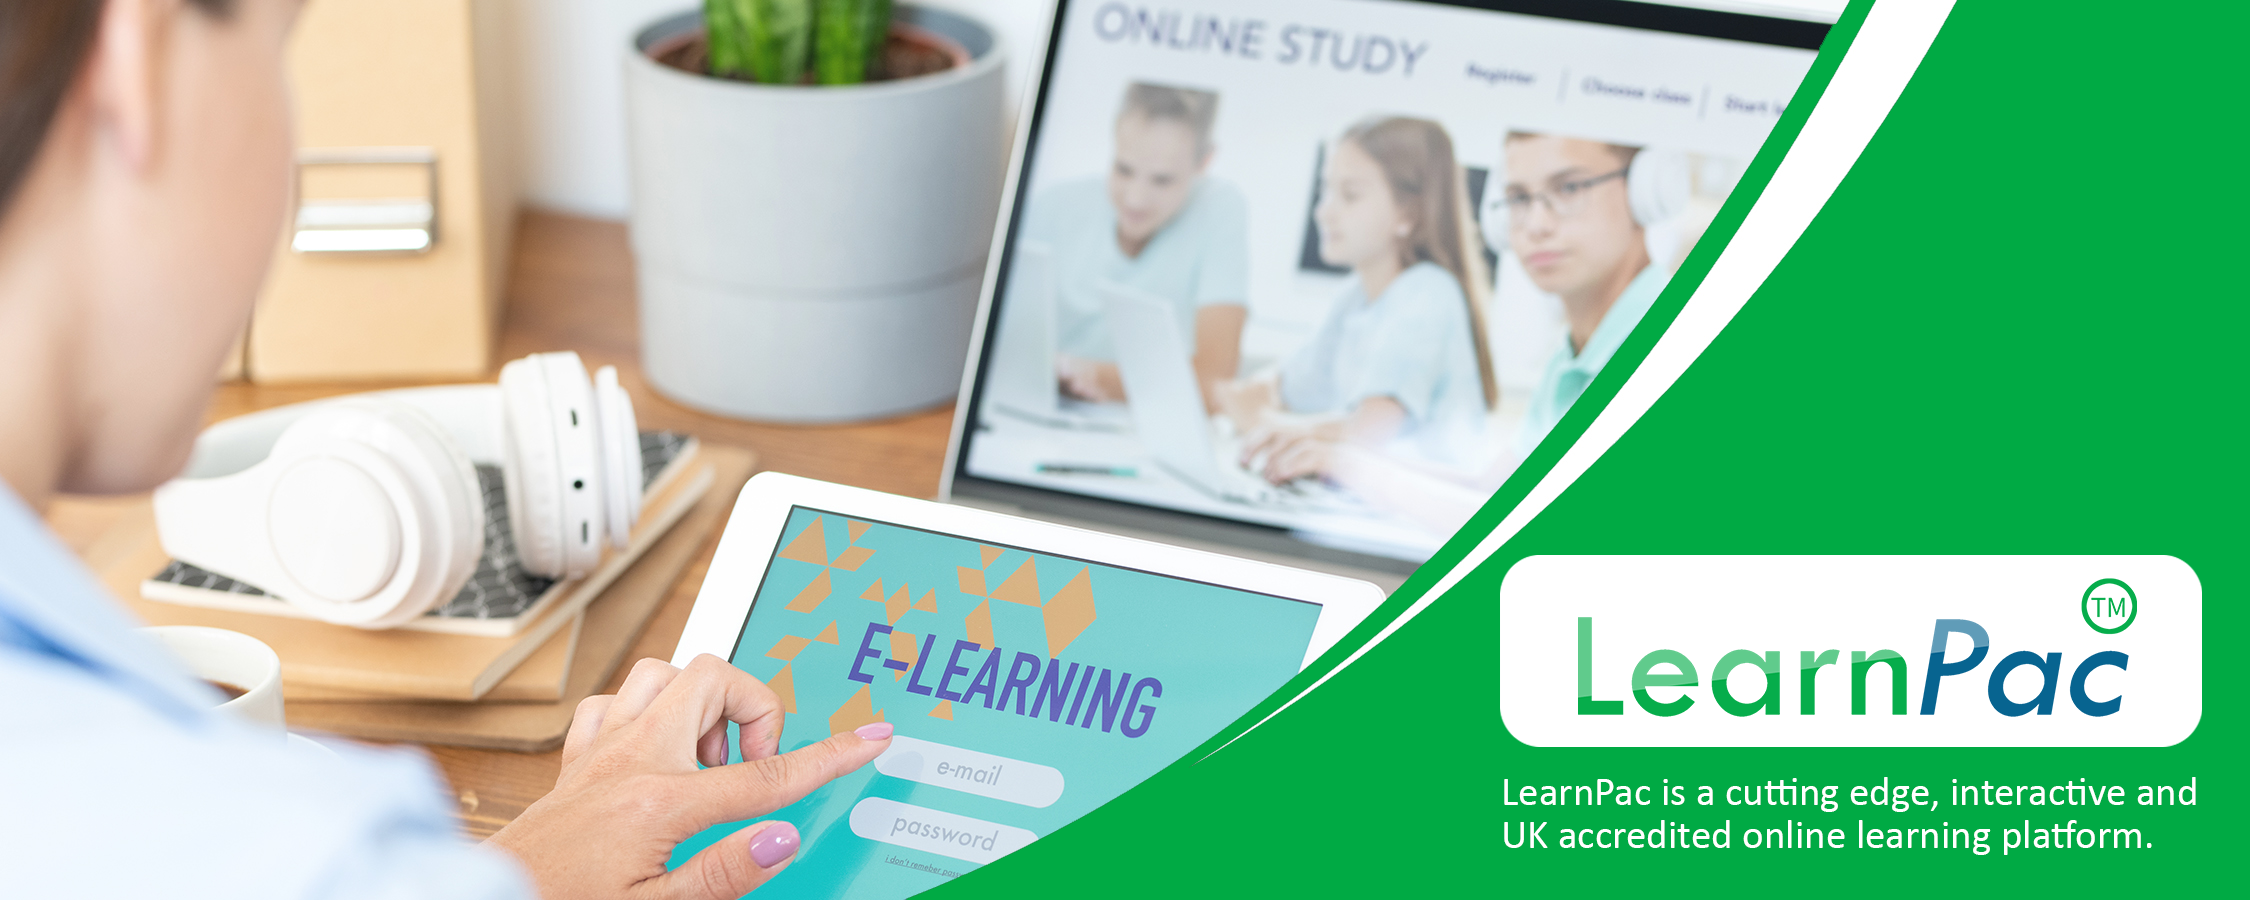 Budgets and Financial Reports Training - Online Learning Courses - E-Learning Courses - LearnPac Systems UK -